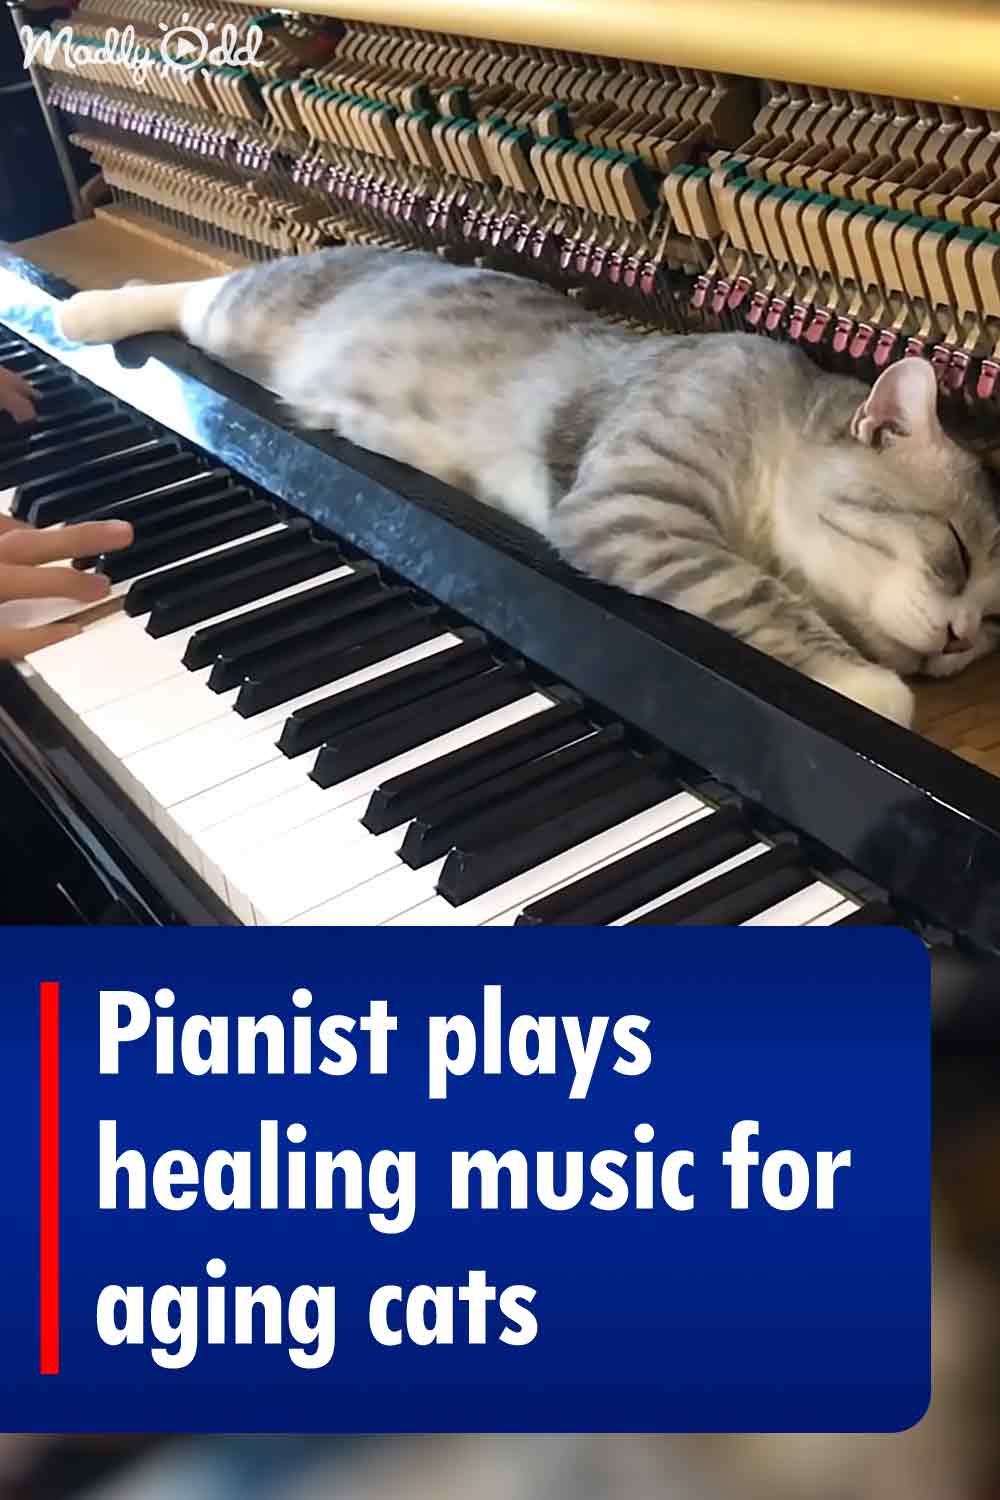 Pianist plays healing music for aging cats